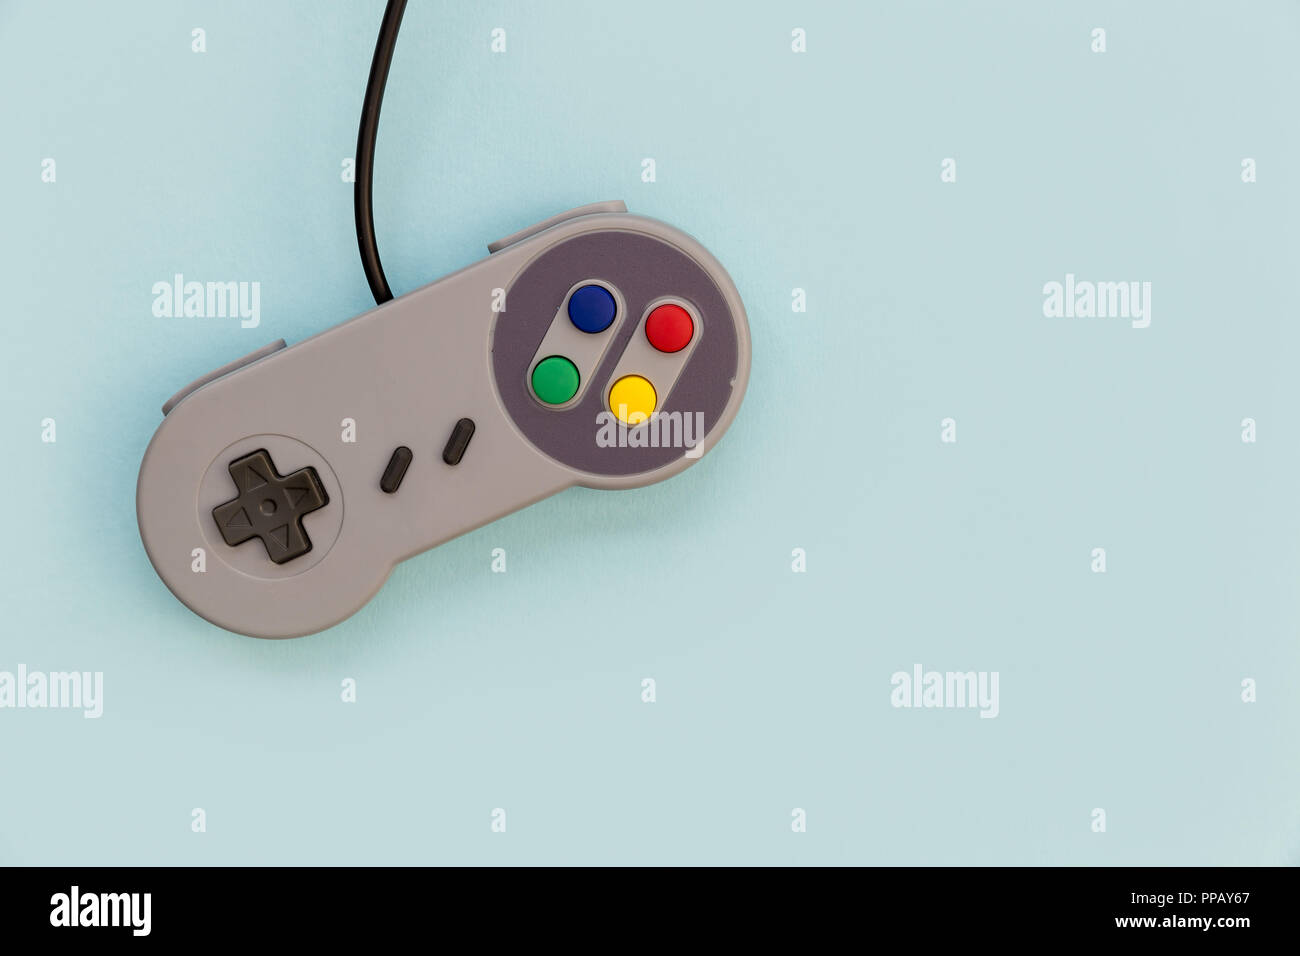 Retro video game controller on blue background Stock Photo